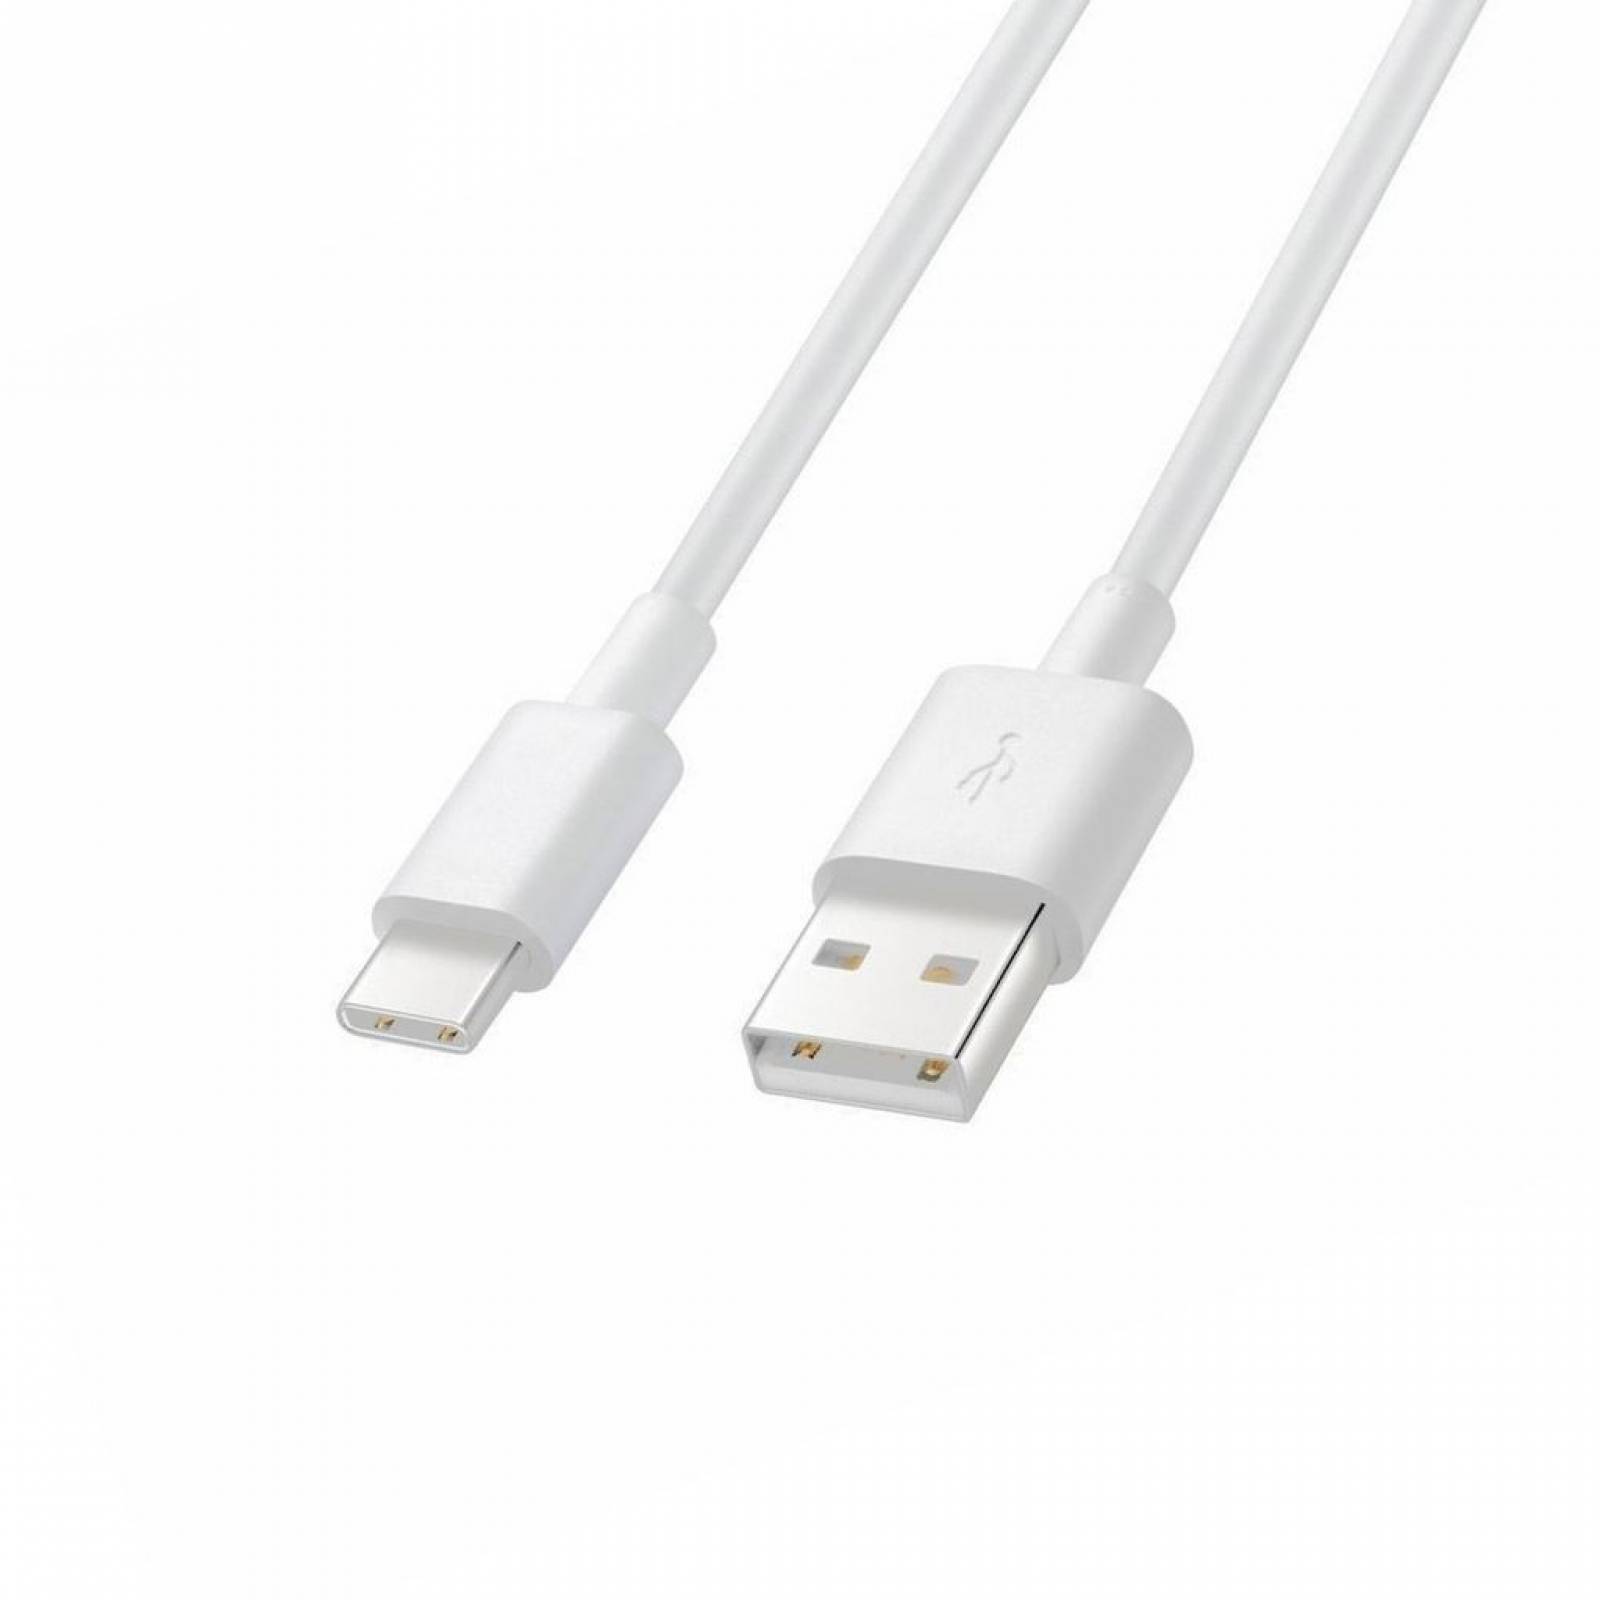 Cable USB Huawei Tipo C Alta Velocidad 1.0m